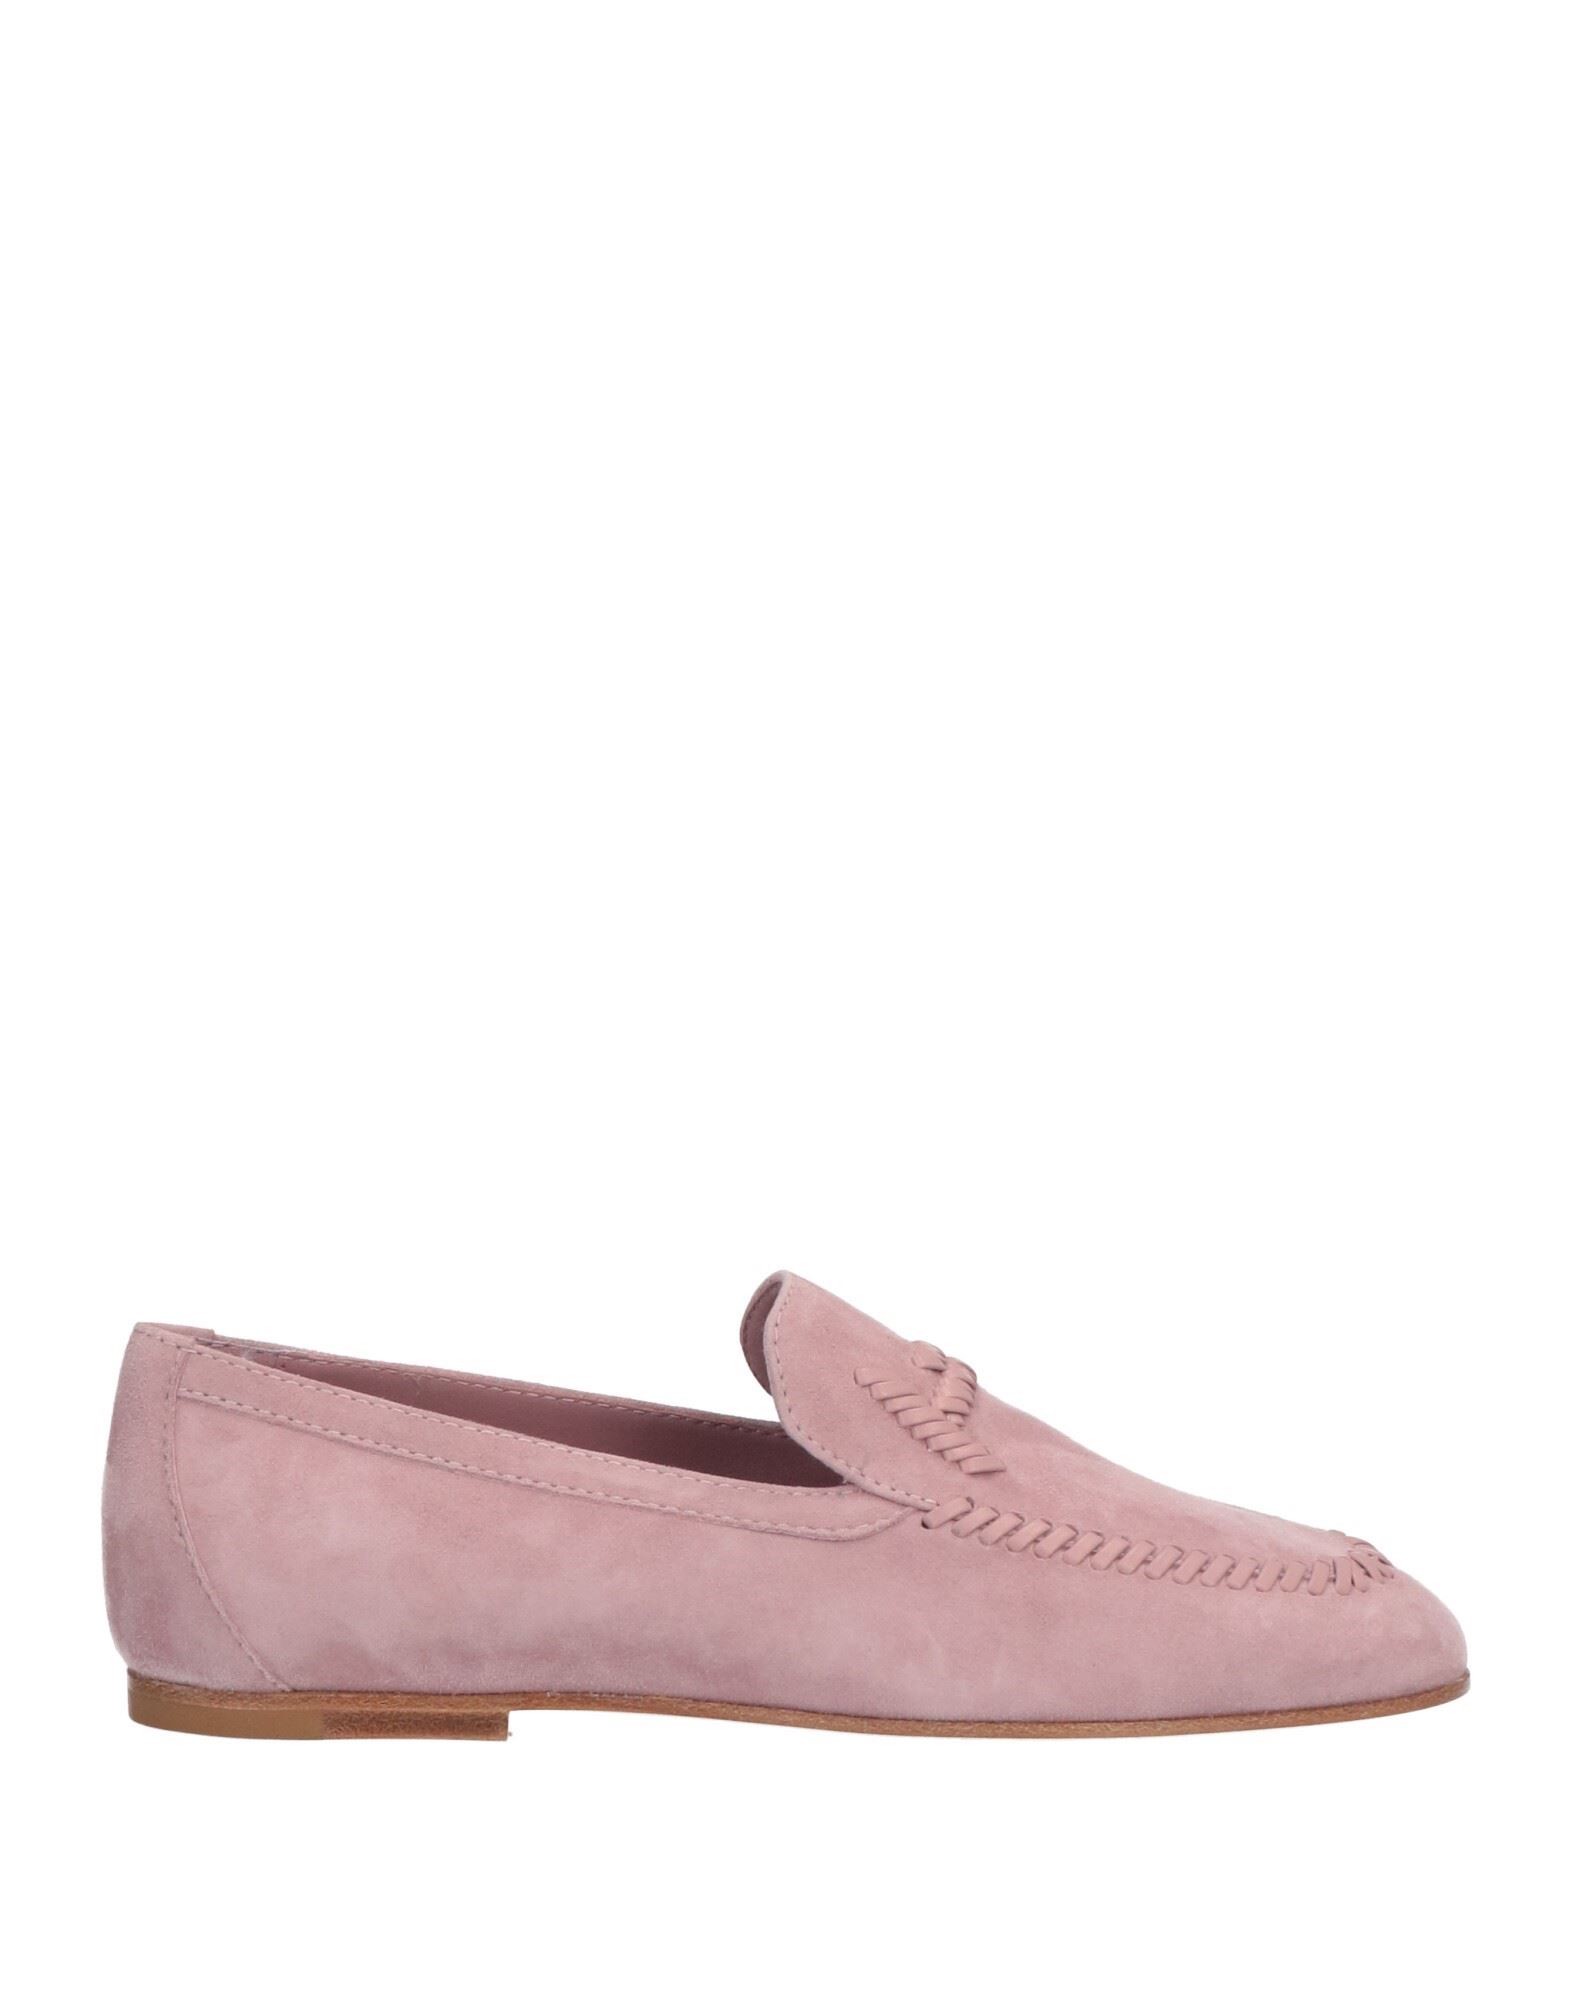 Shop Tod's Woman Loafers Pastel Pink Size 7.5 Soft Leather